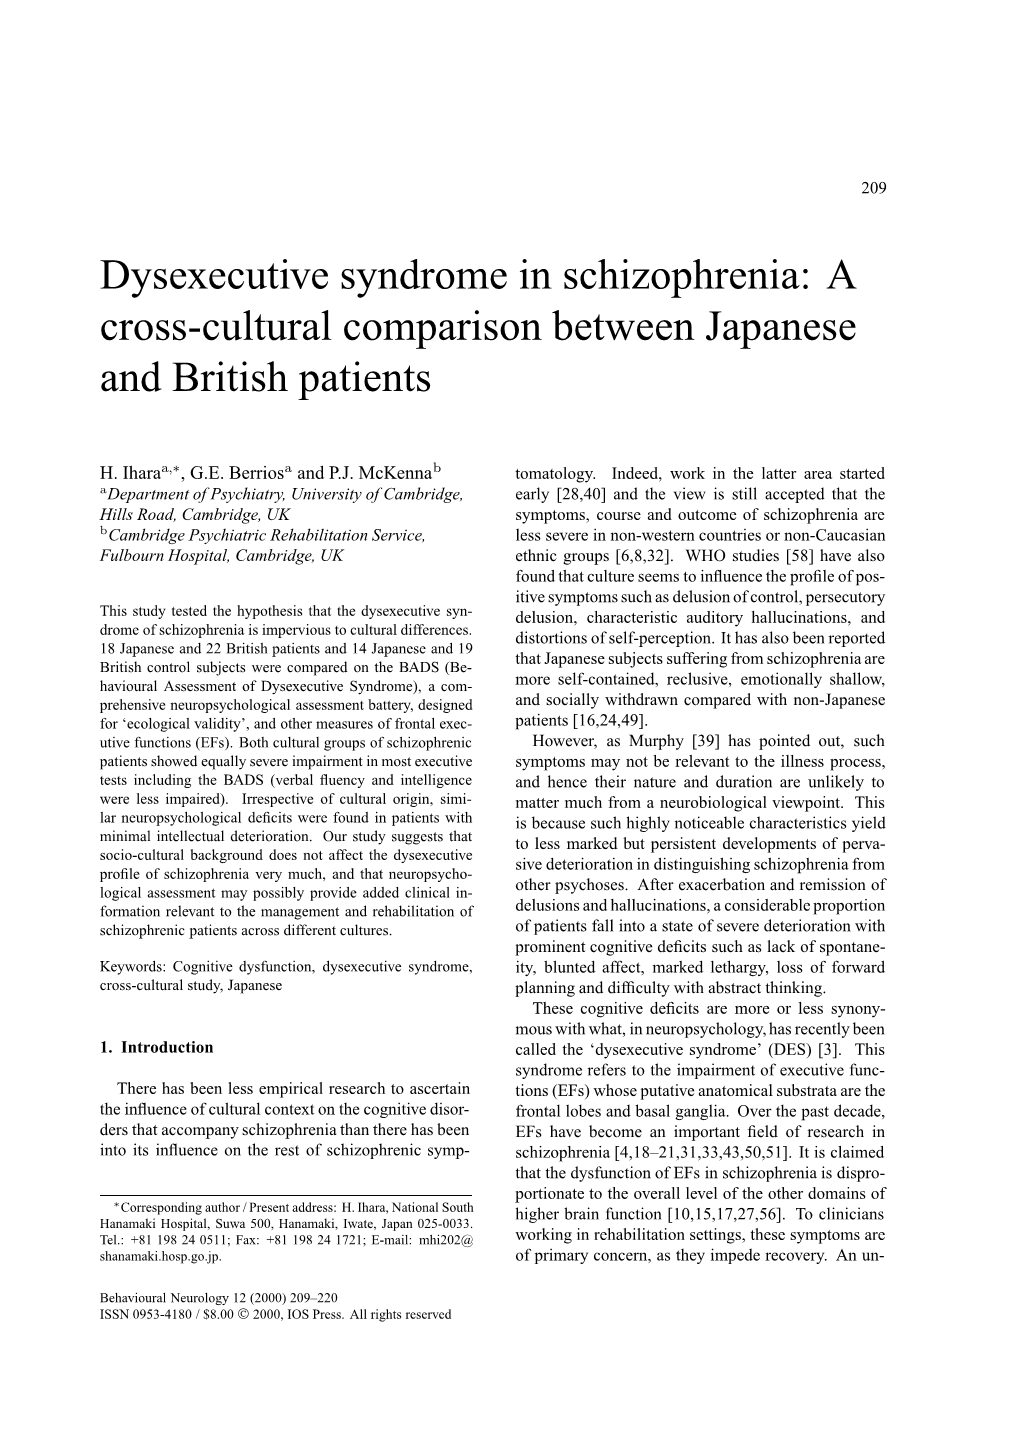 Dysexecutive Syndrome in Schizophrenia: a Cross-Cultural Comparison Between Japanese and British Patients